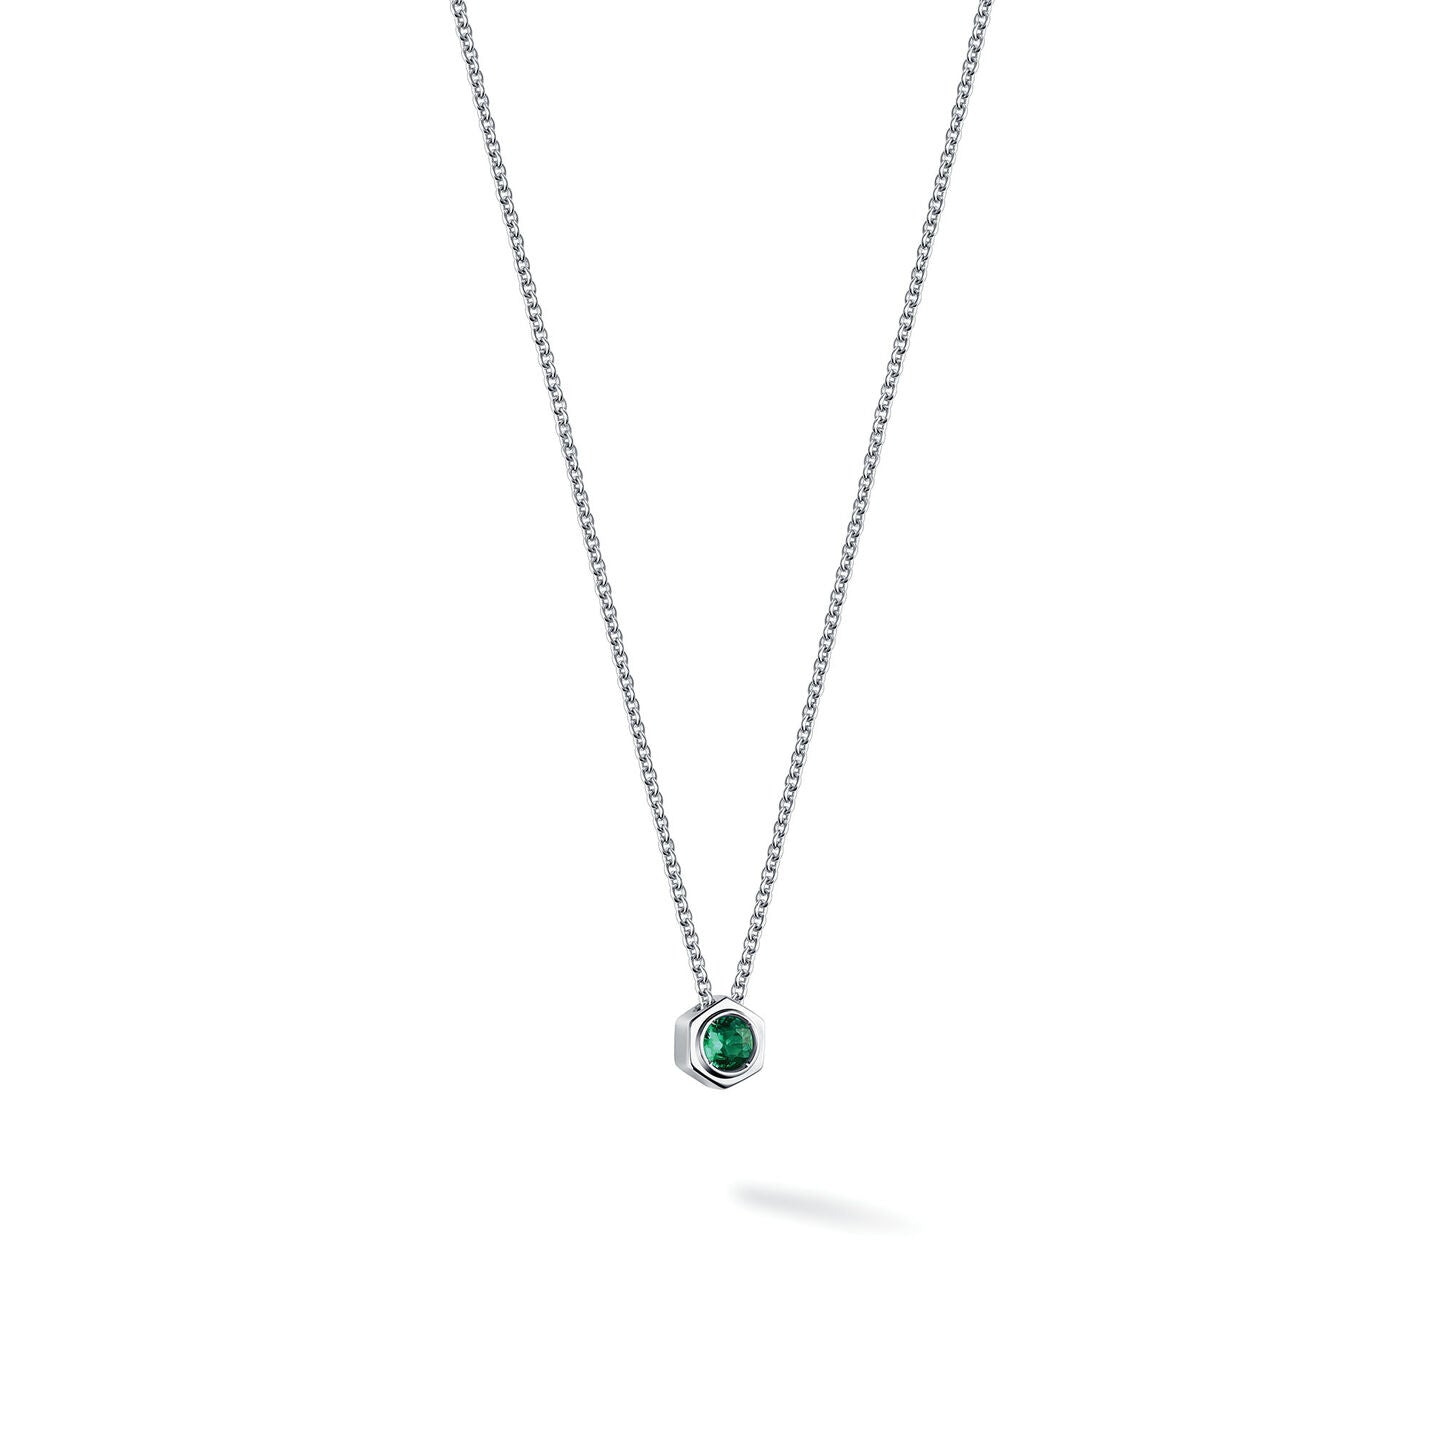 Birks Bee Chic Emerald and Silver Necklace